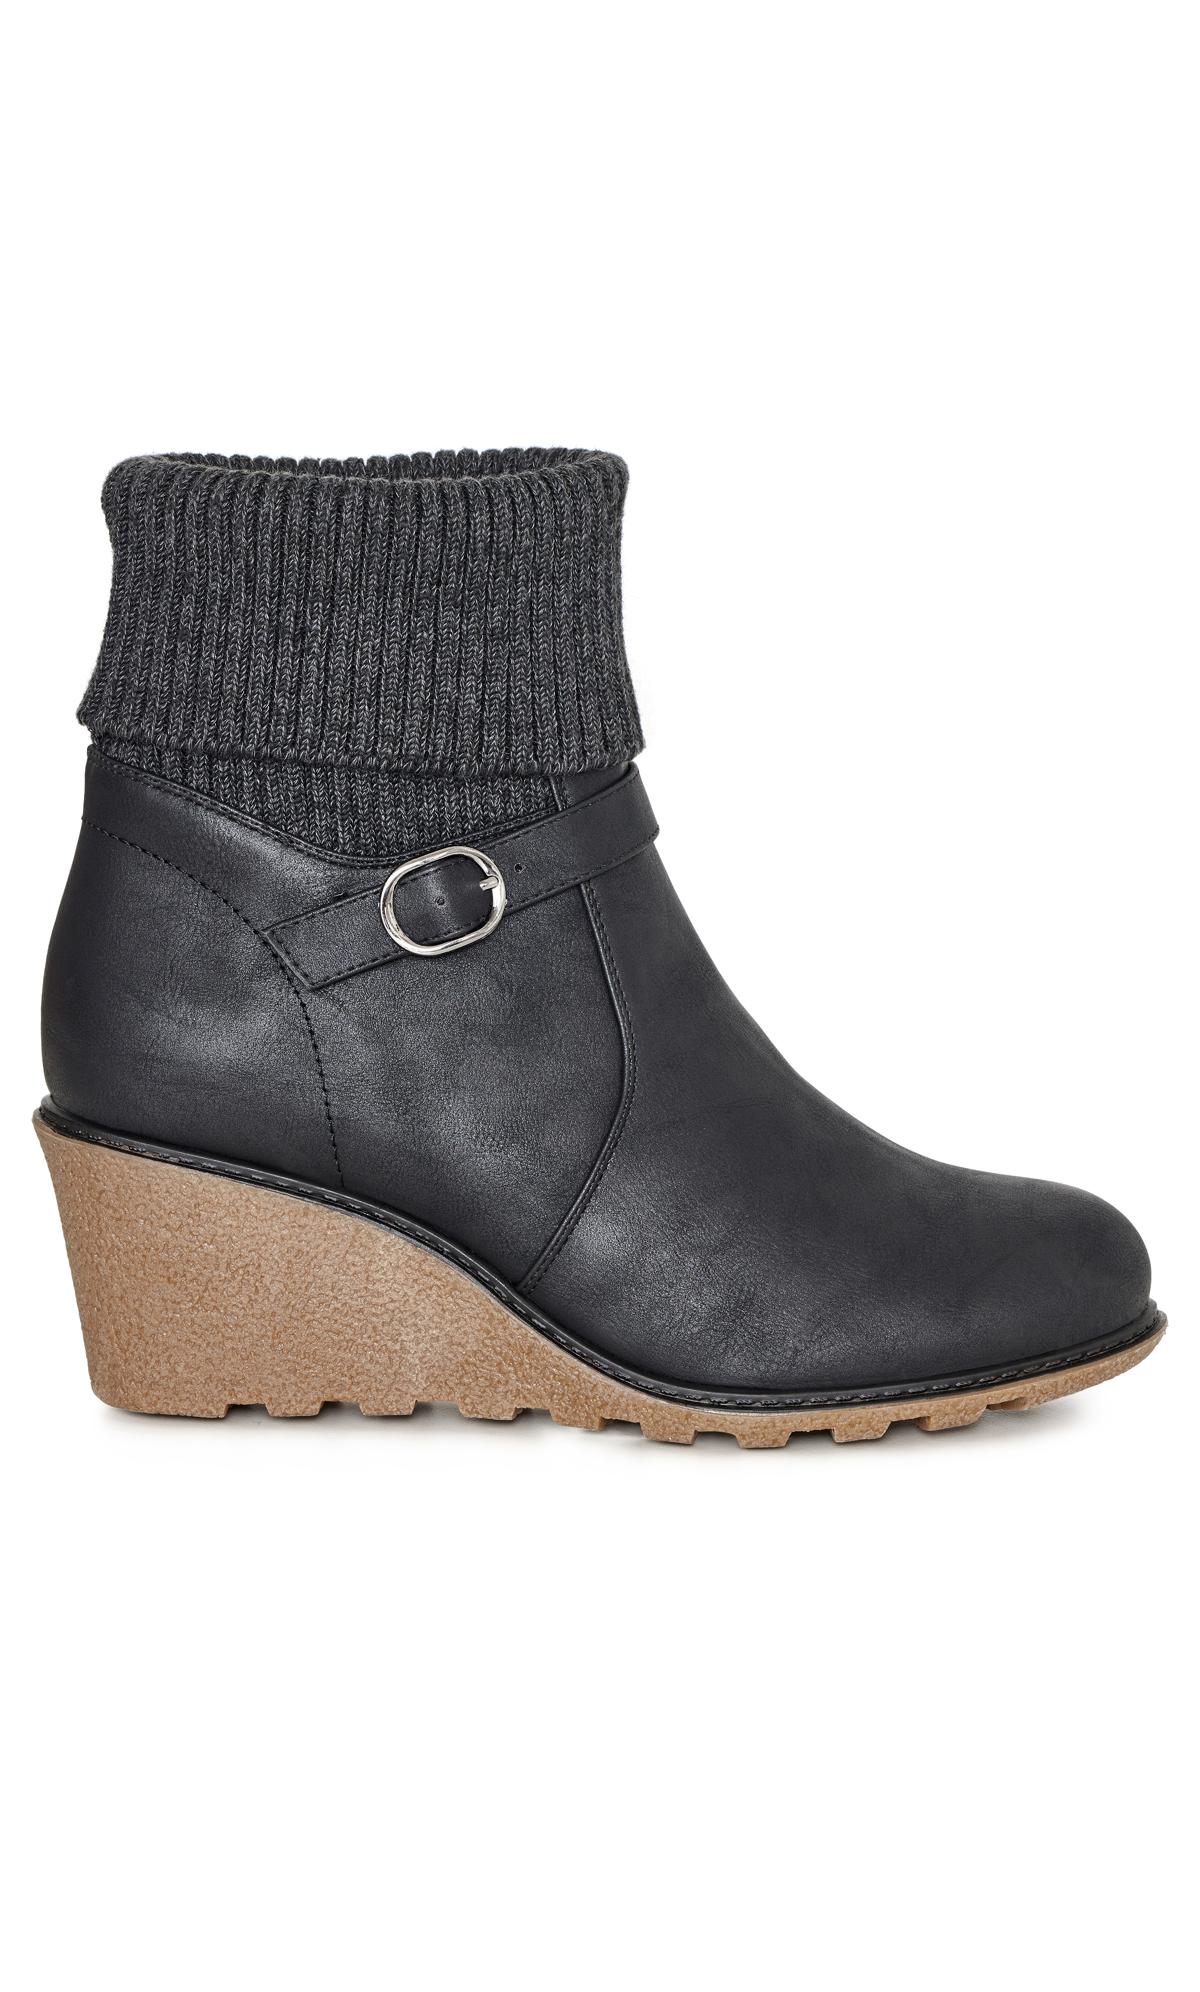 Emily Black Wide Fit Wedge Boot 2